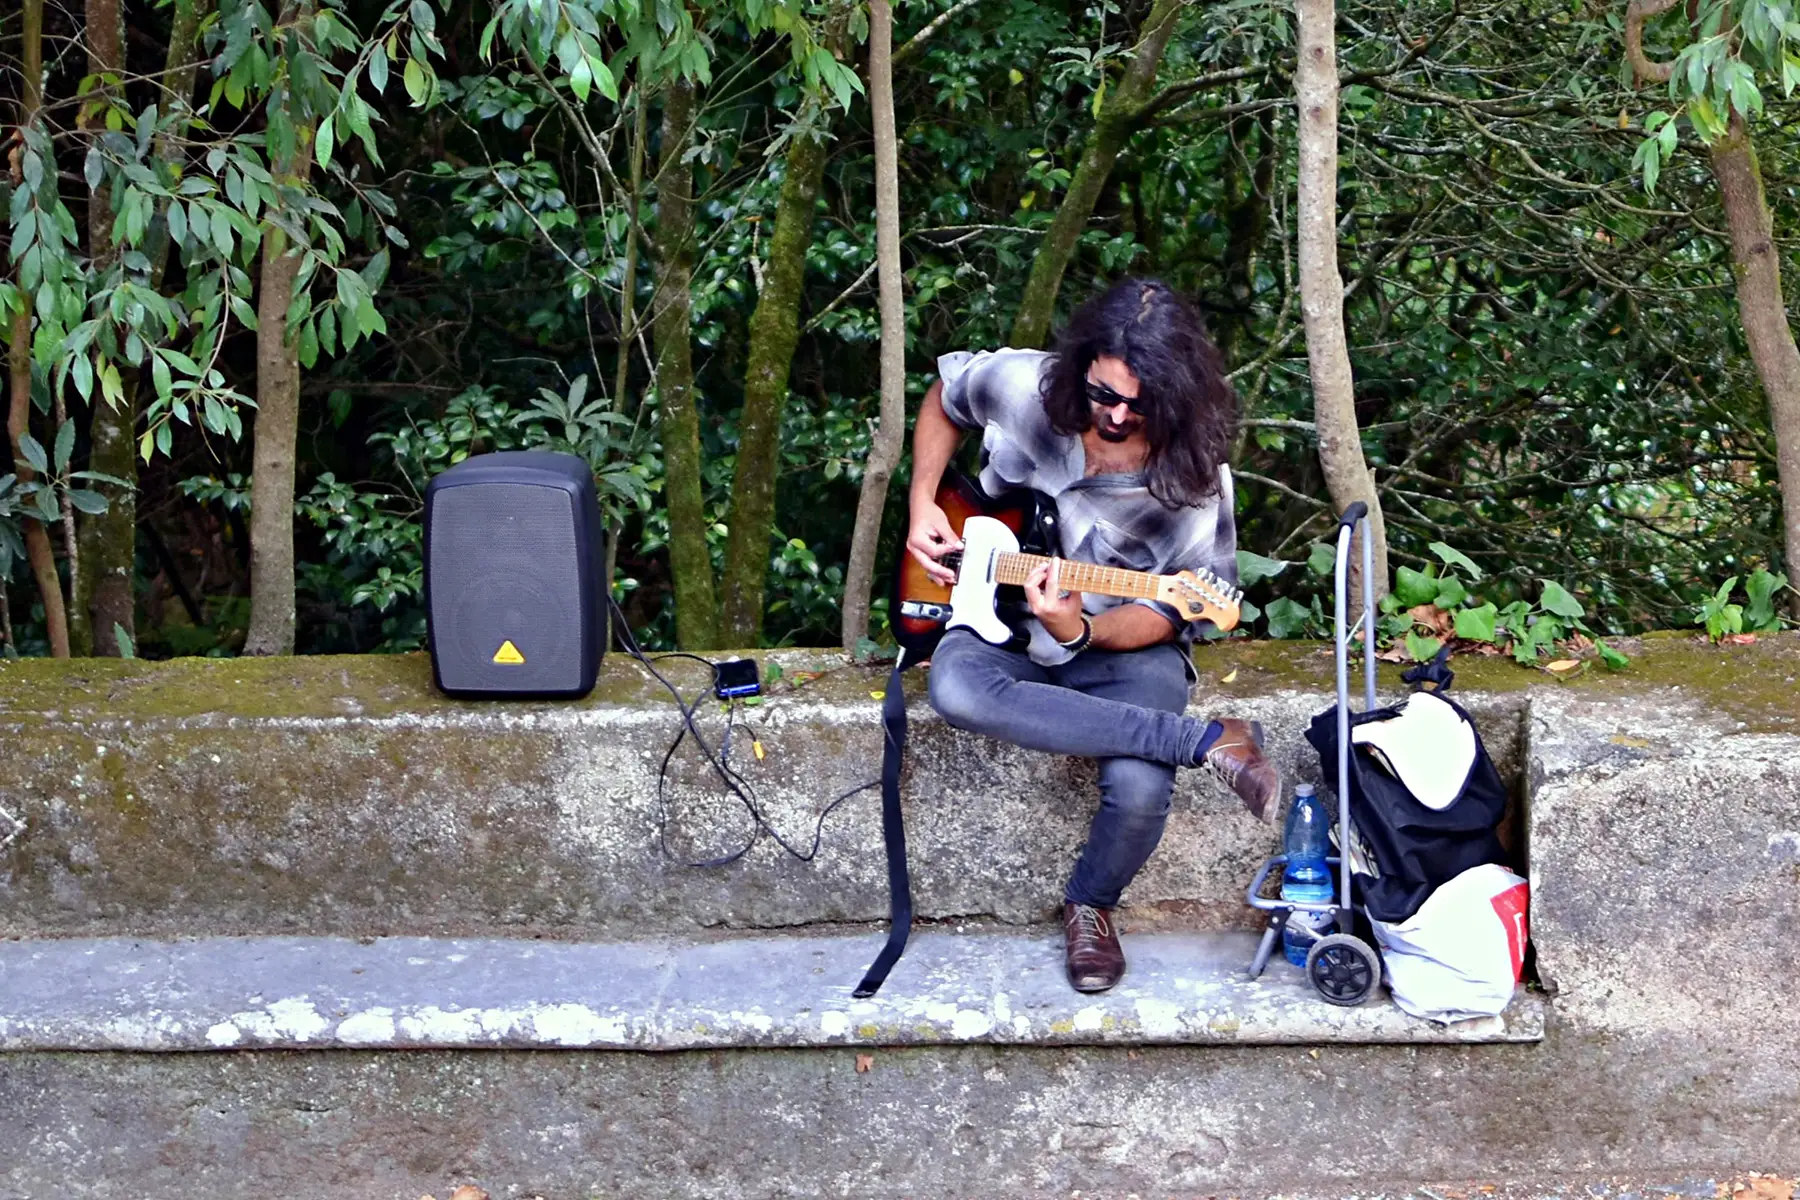 A street musician playing electric guitar with an amplifier